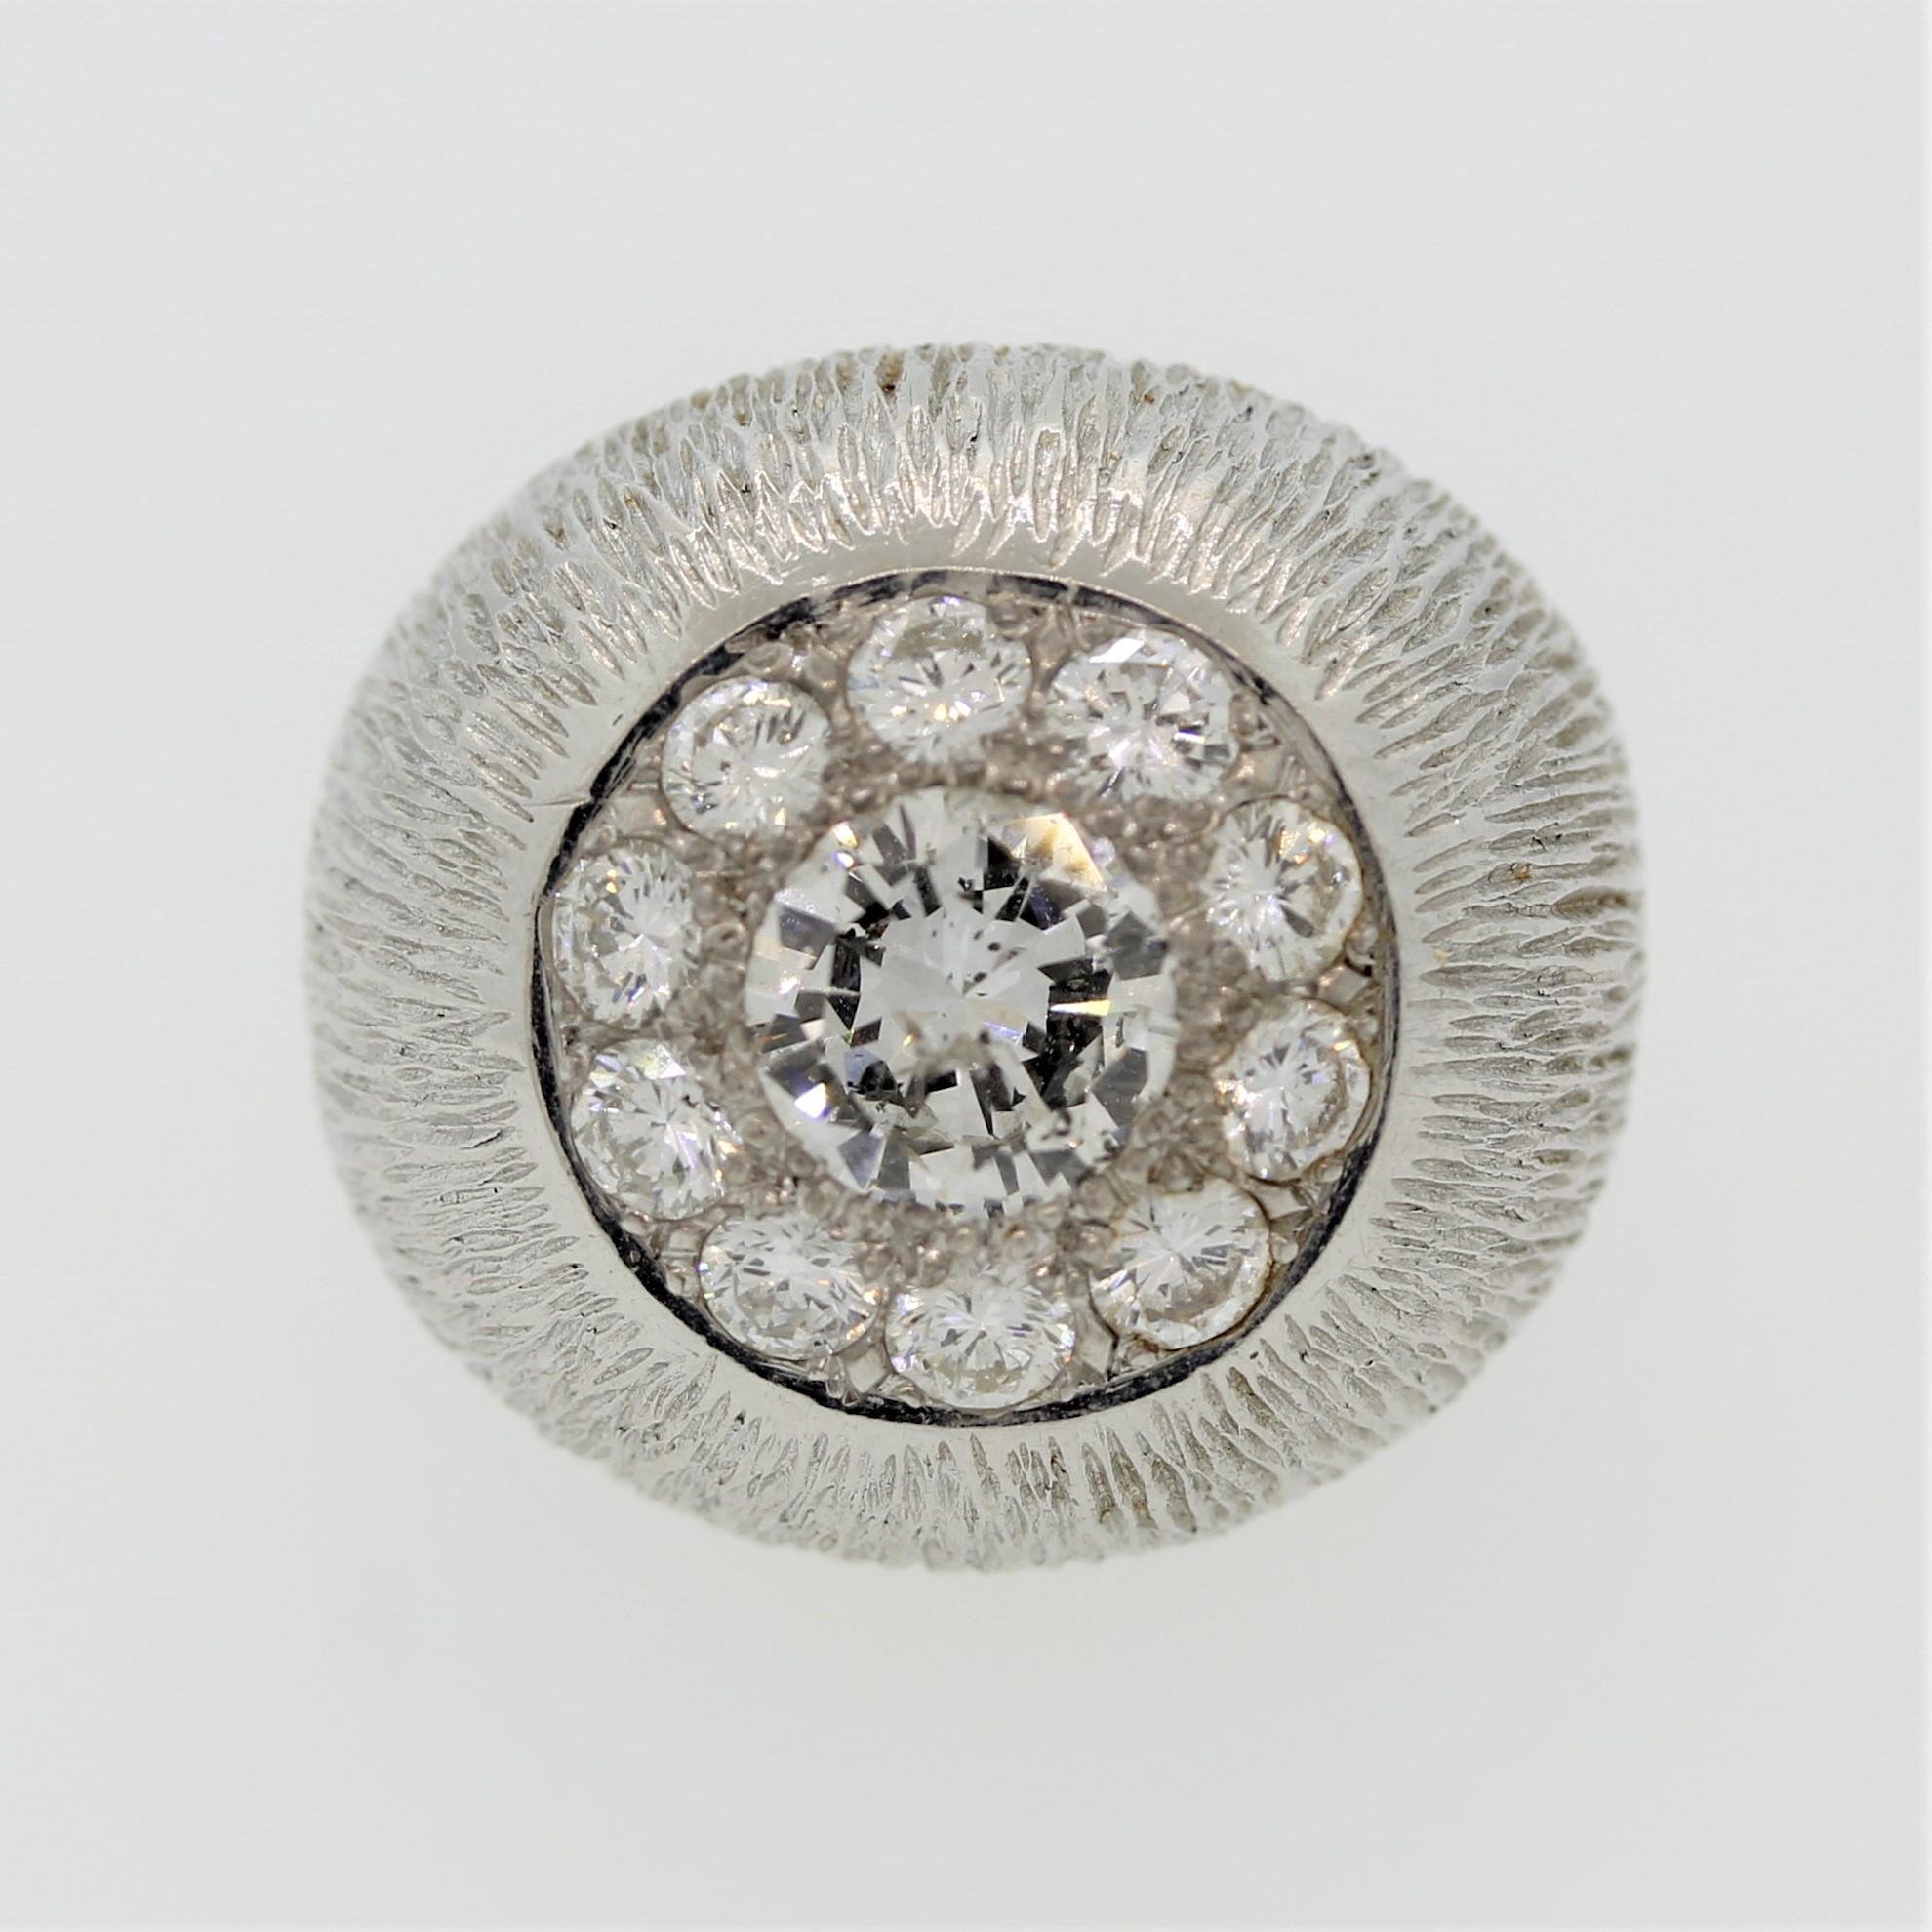 A classic domed ring featuring a center diamond weighing approximately 1 carat. It is haloed by an additional 1 carat of diamonds making the center diamond appear larger. Made in 18k white gold in a bombe dome style.

Ring Size 4.5 (sizeable)